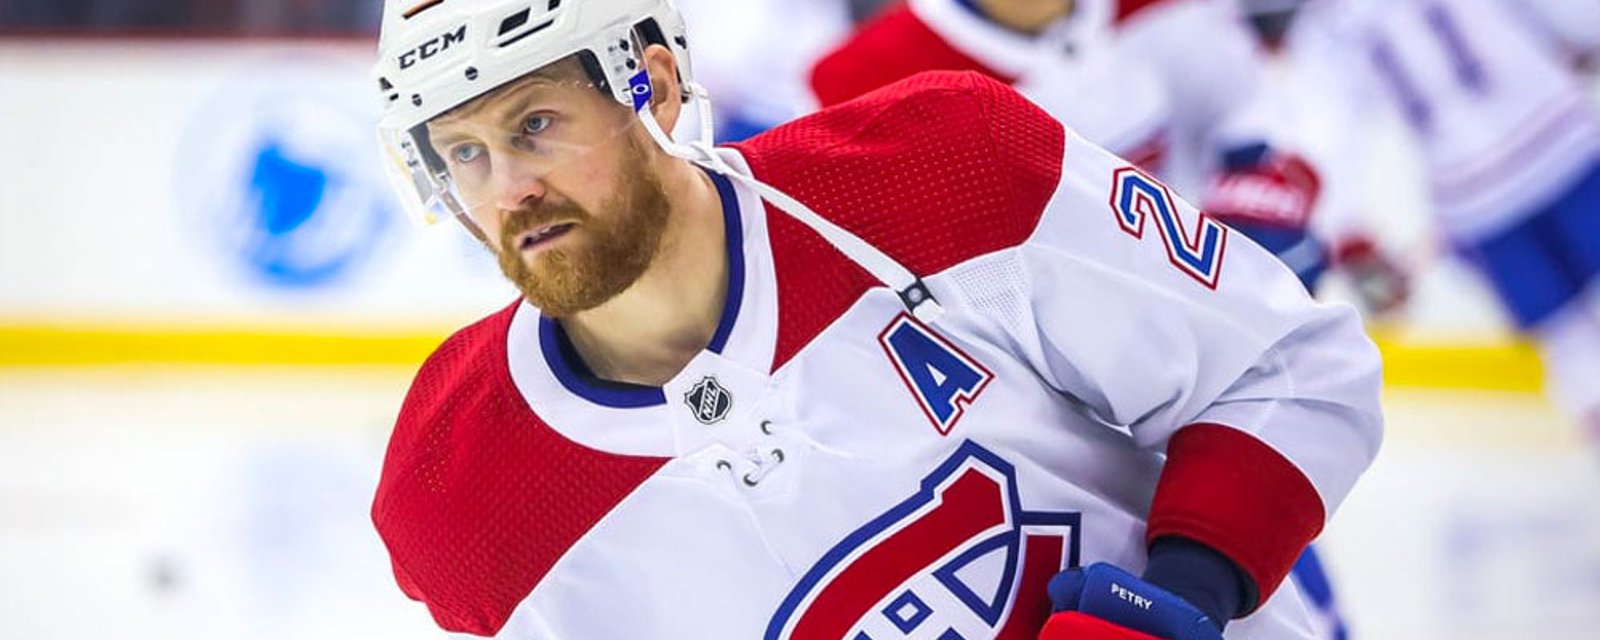 The Montreal Canadiens have traded Jeff Petry